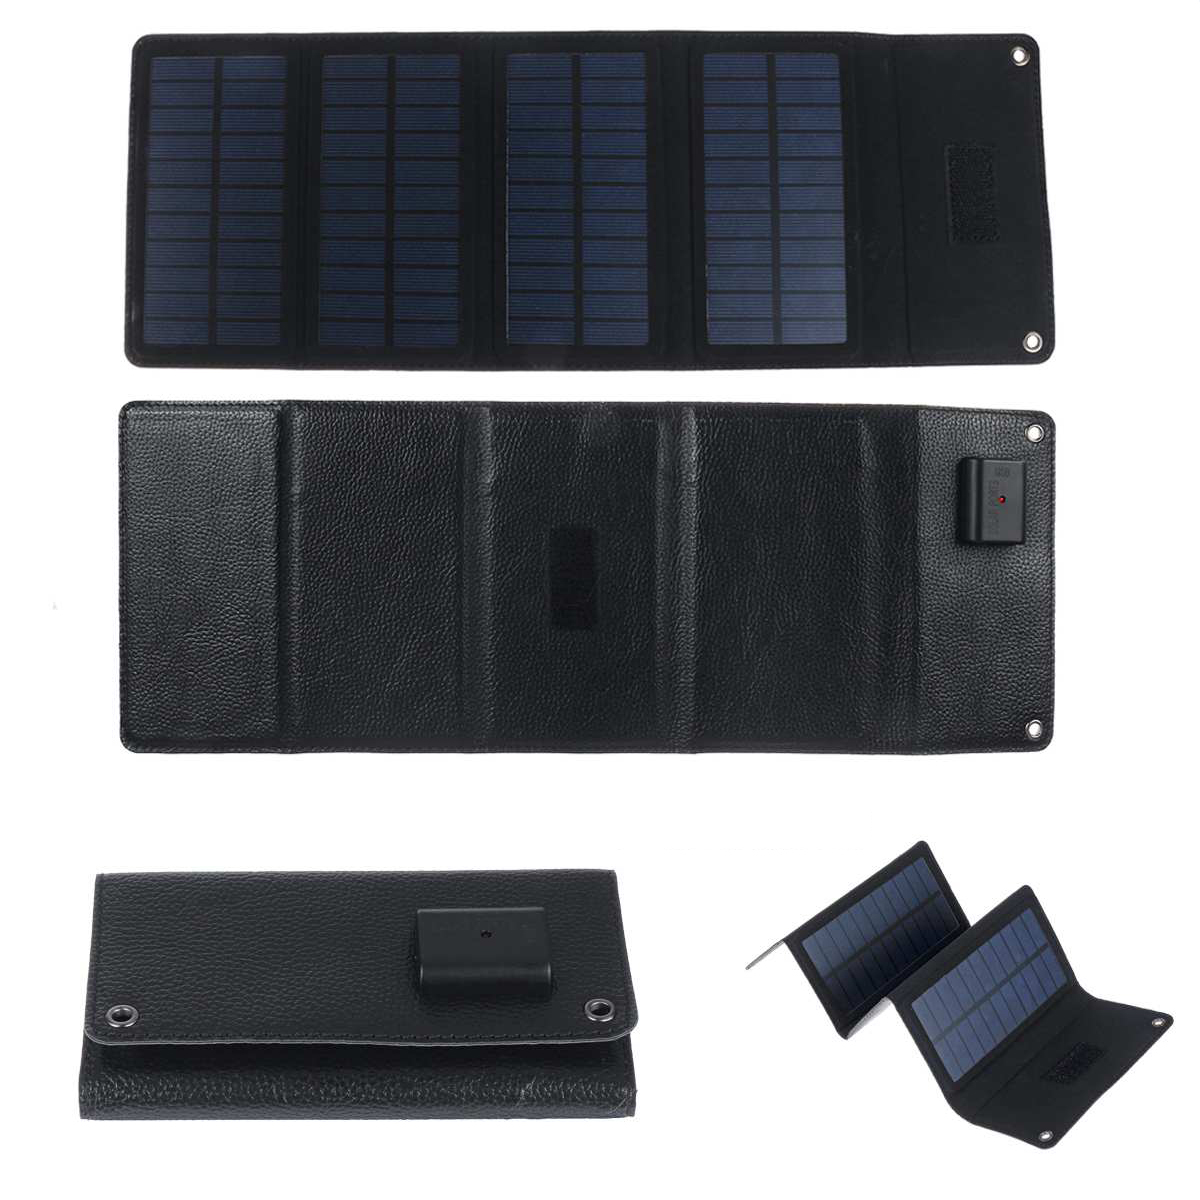 

7W 5V Waterproof Foldable Solar Panel USB Battery Power Charger